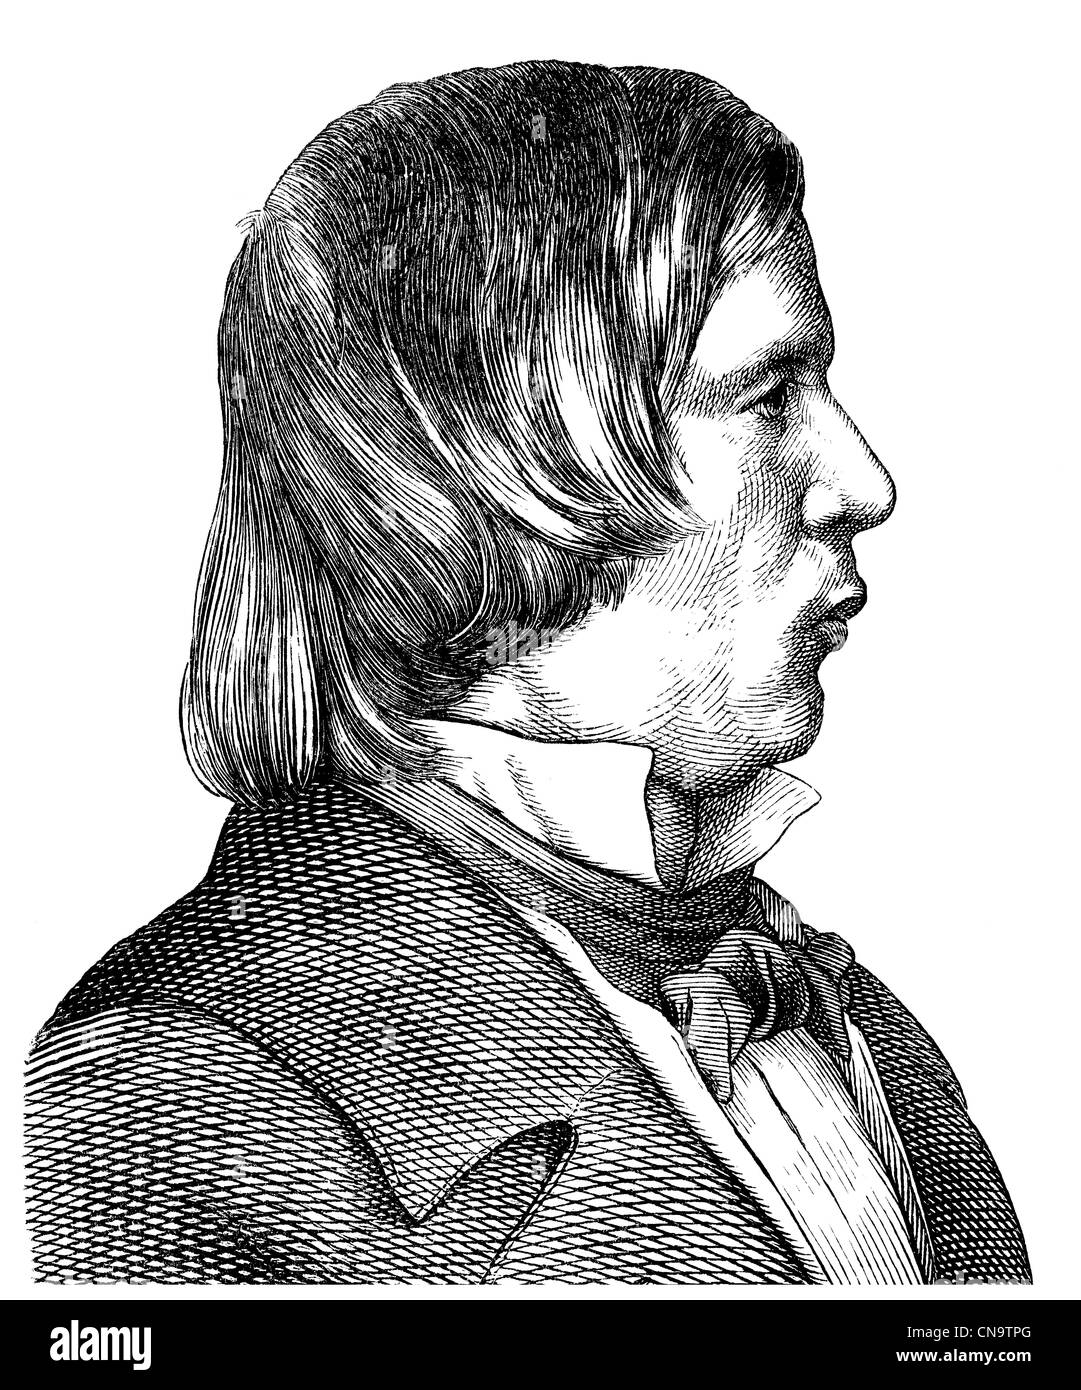 Historical drawing, 19th century, Robert Schumann, 1810 - 1856, a German composer and pianist of the Romantic Stock Photo